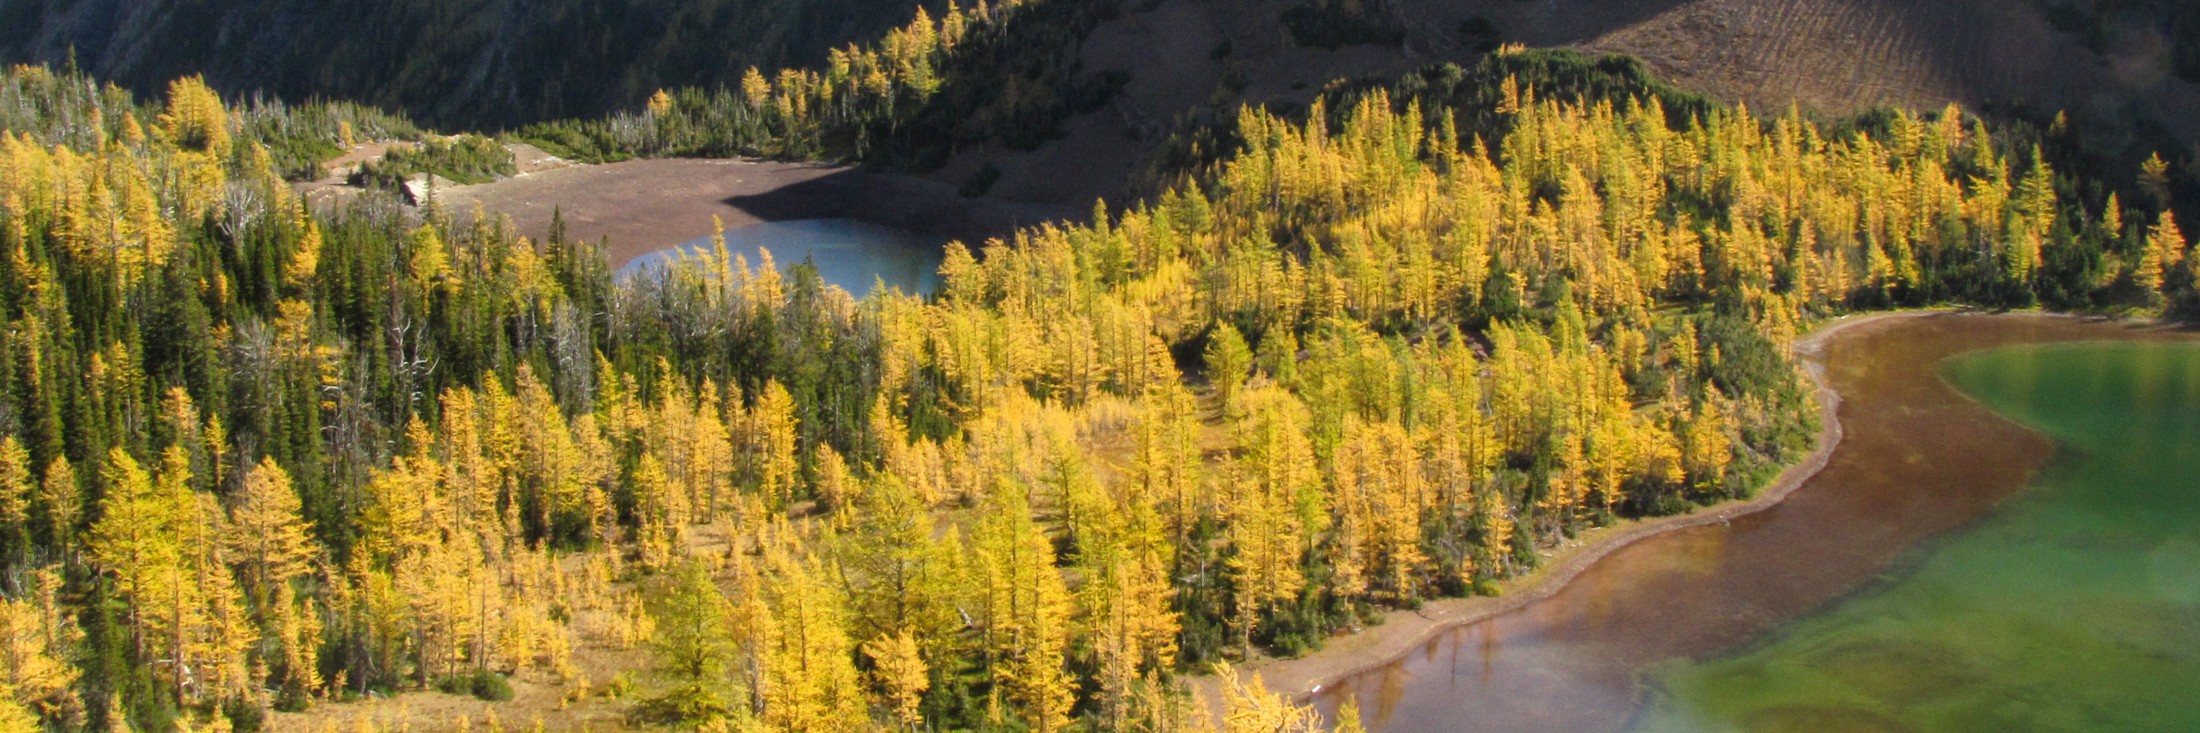 A bird’s eye view of a dense larch forest with lakes on the sides and mountains in the background.